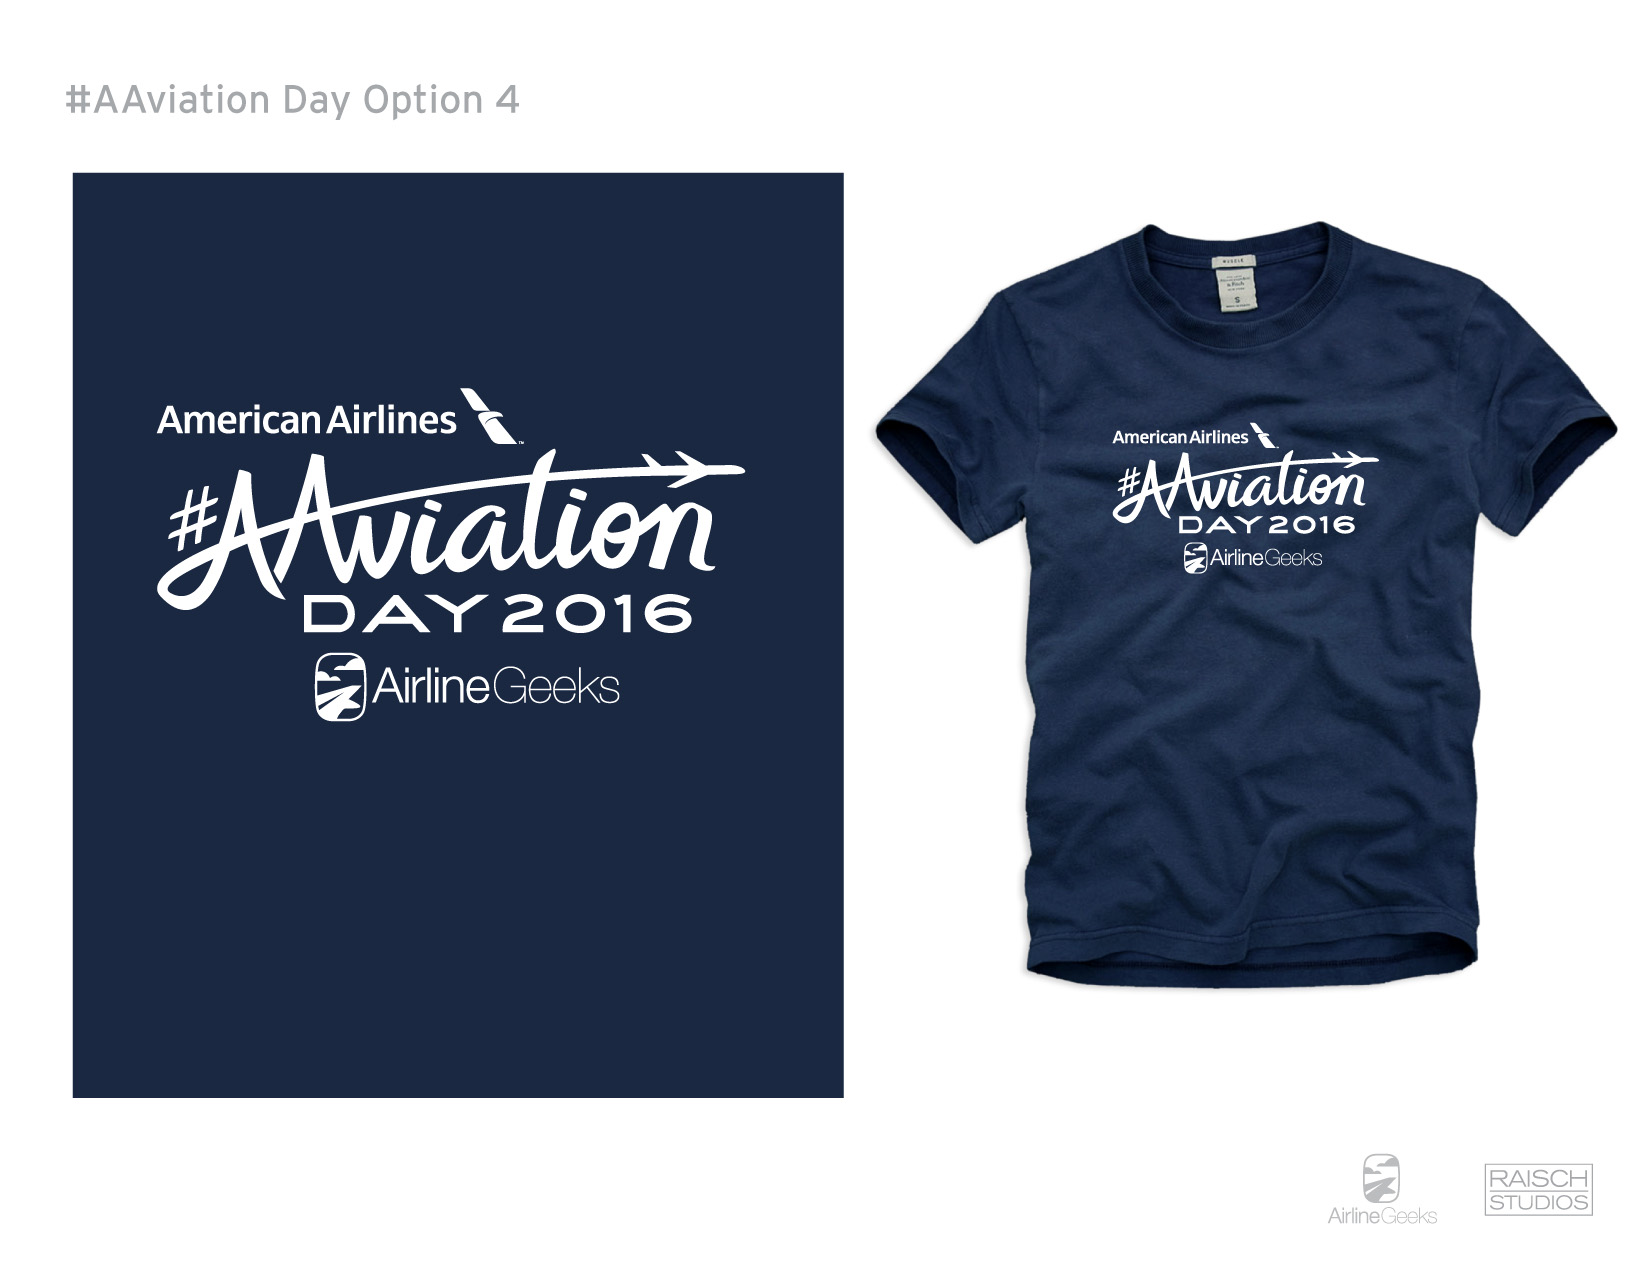 AAviation_Day_Shirts-June28-4A.jpg